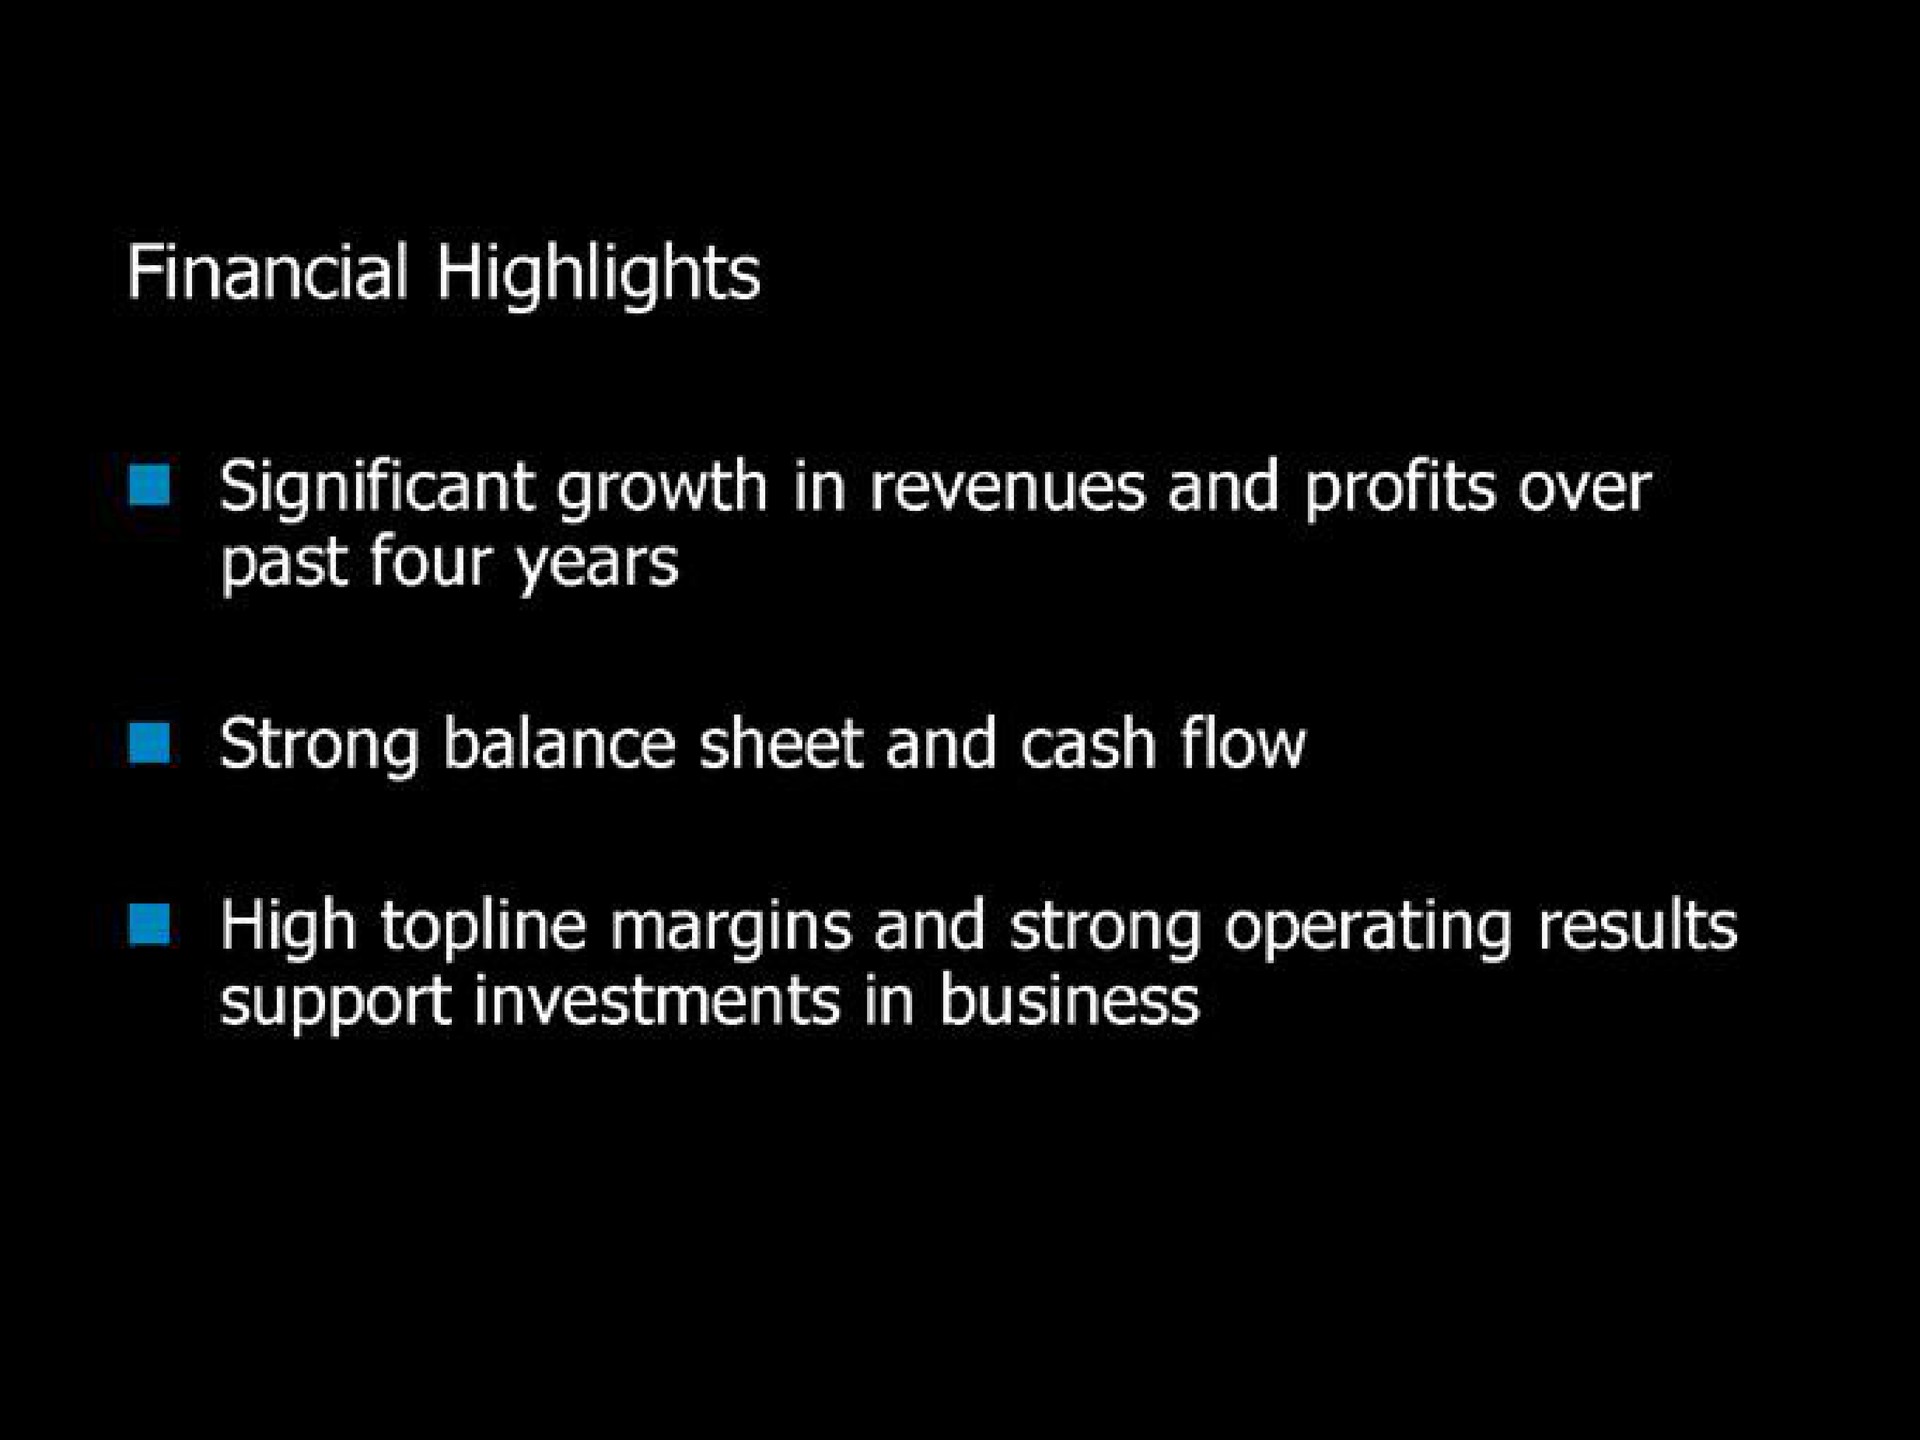 financial highlights past four years strong balance sheet and cash flow high topline margins and strong operating results | Blockbuster Video